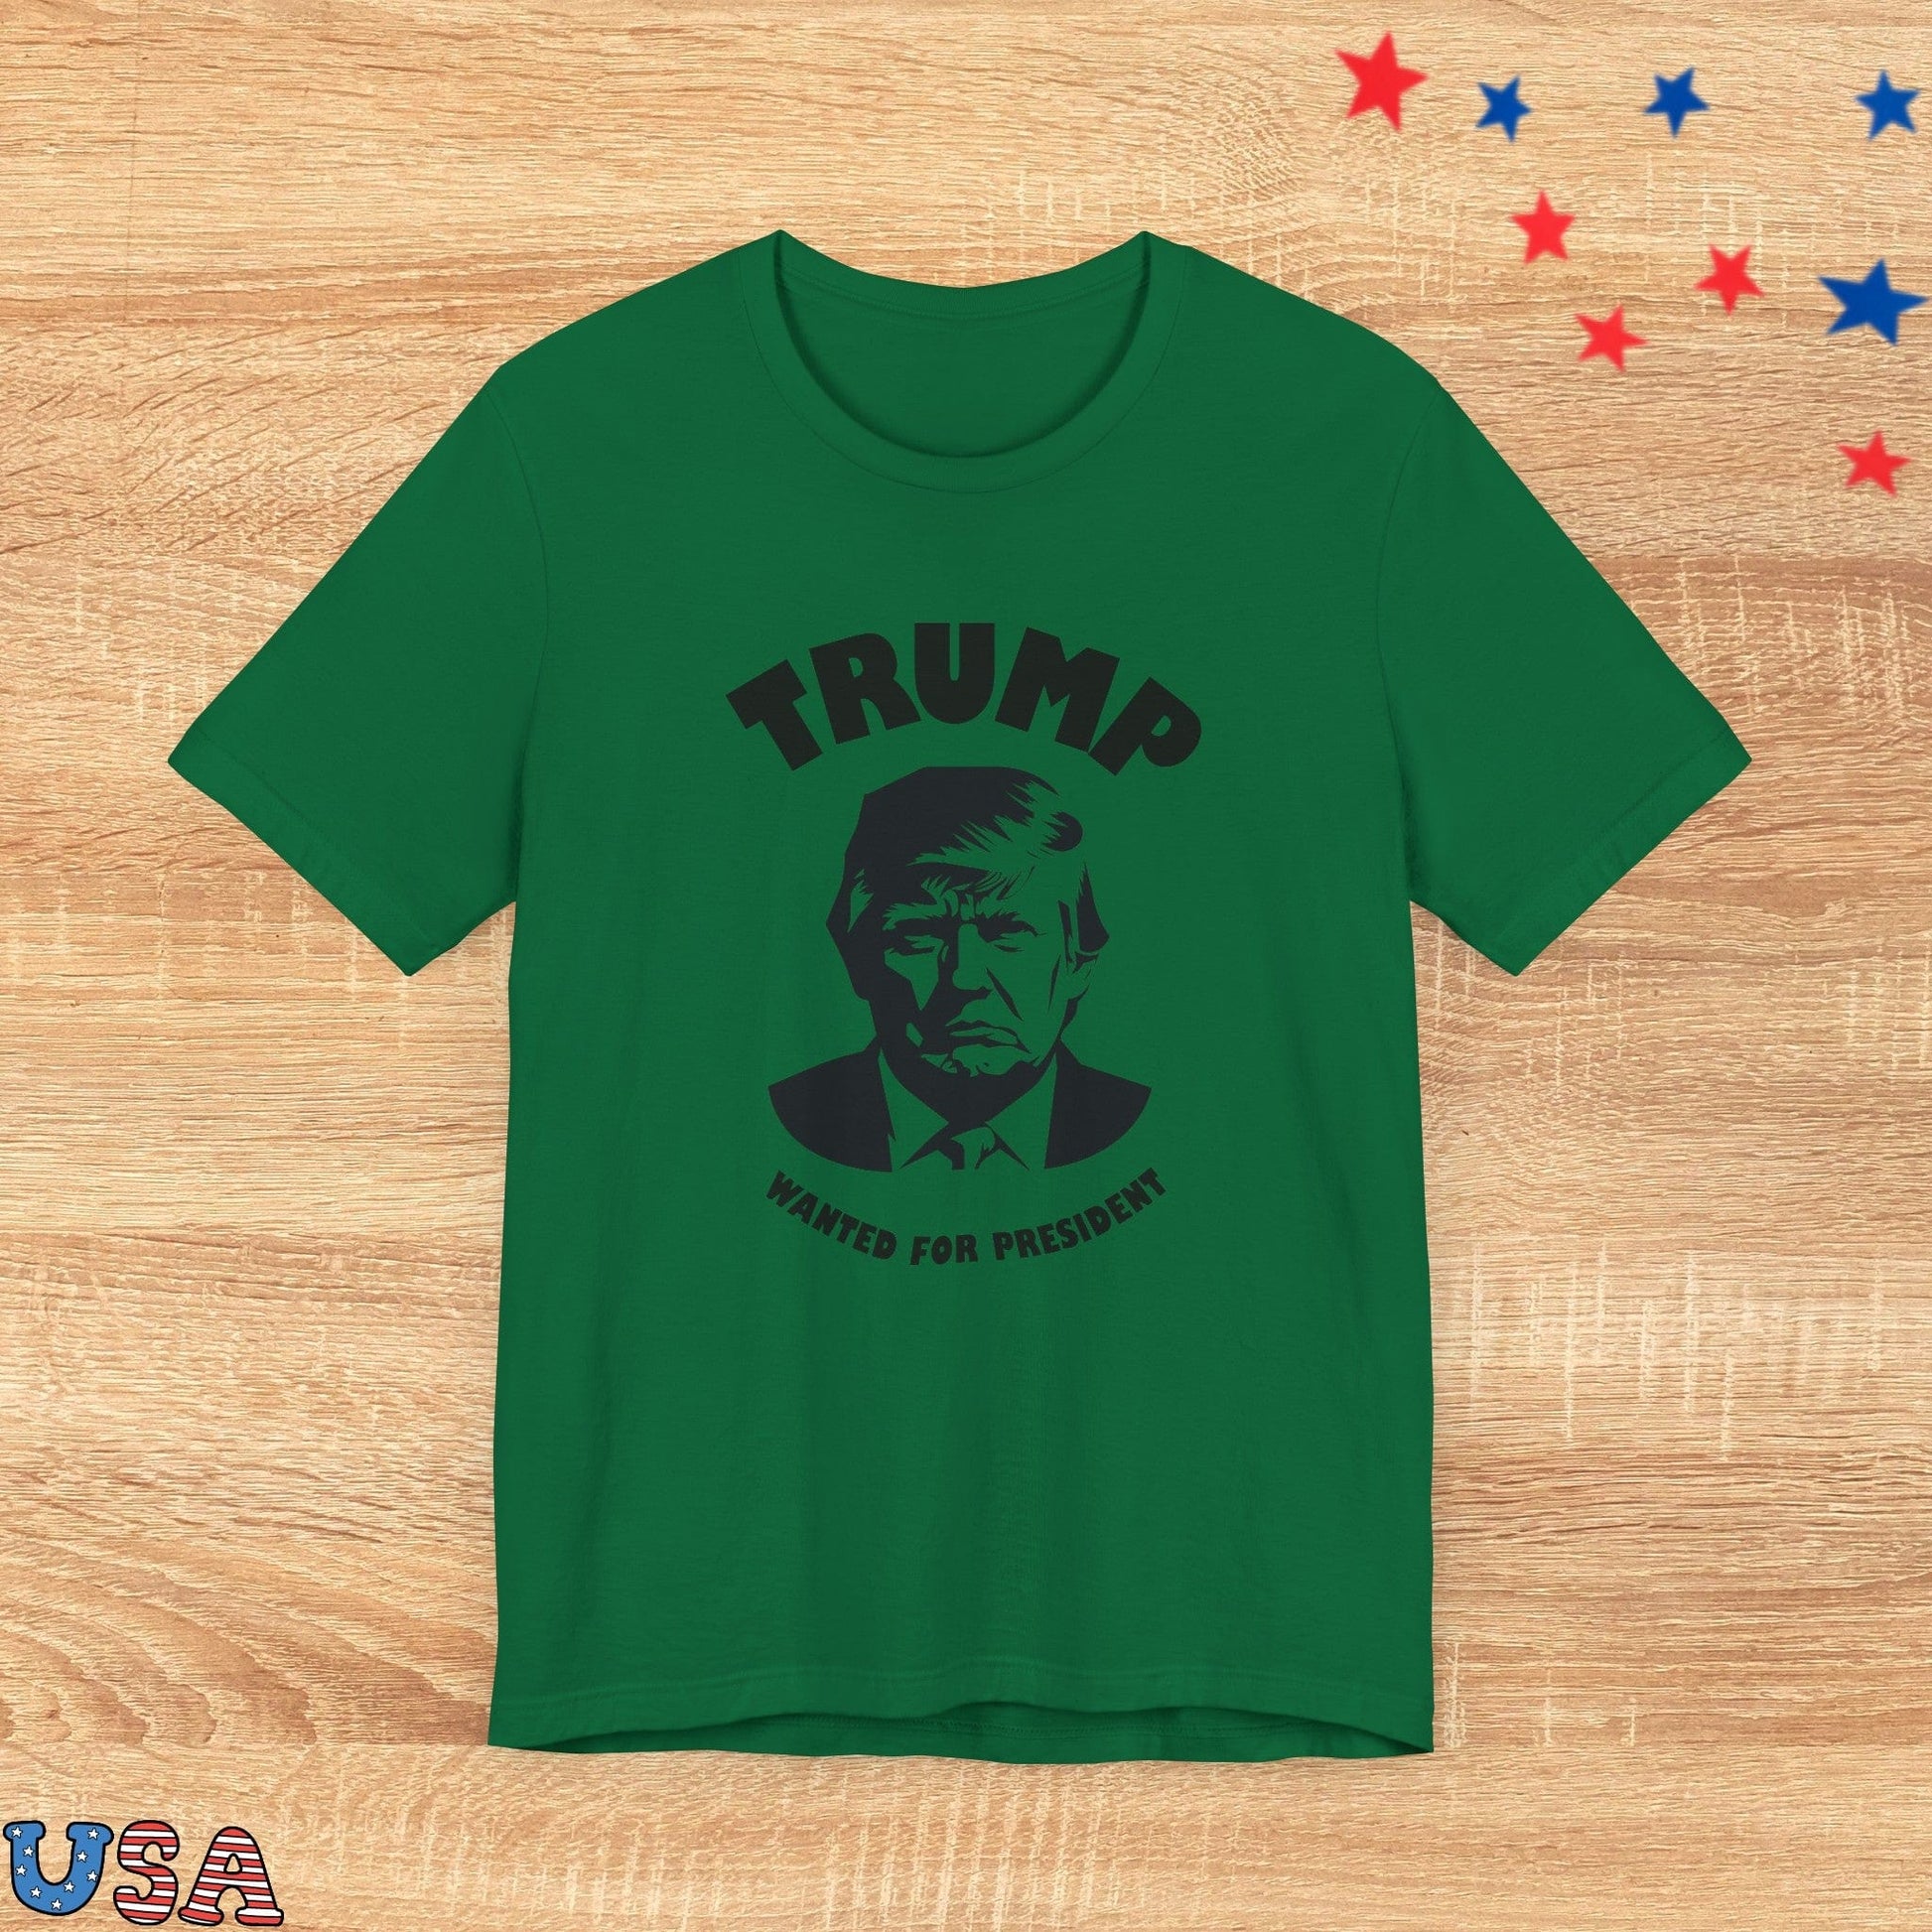 patriotic stars T-Shirt Kelly / XS Trump Wanted For President